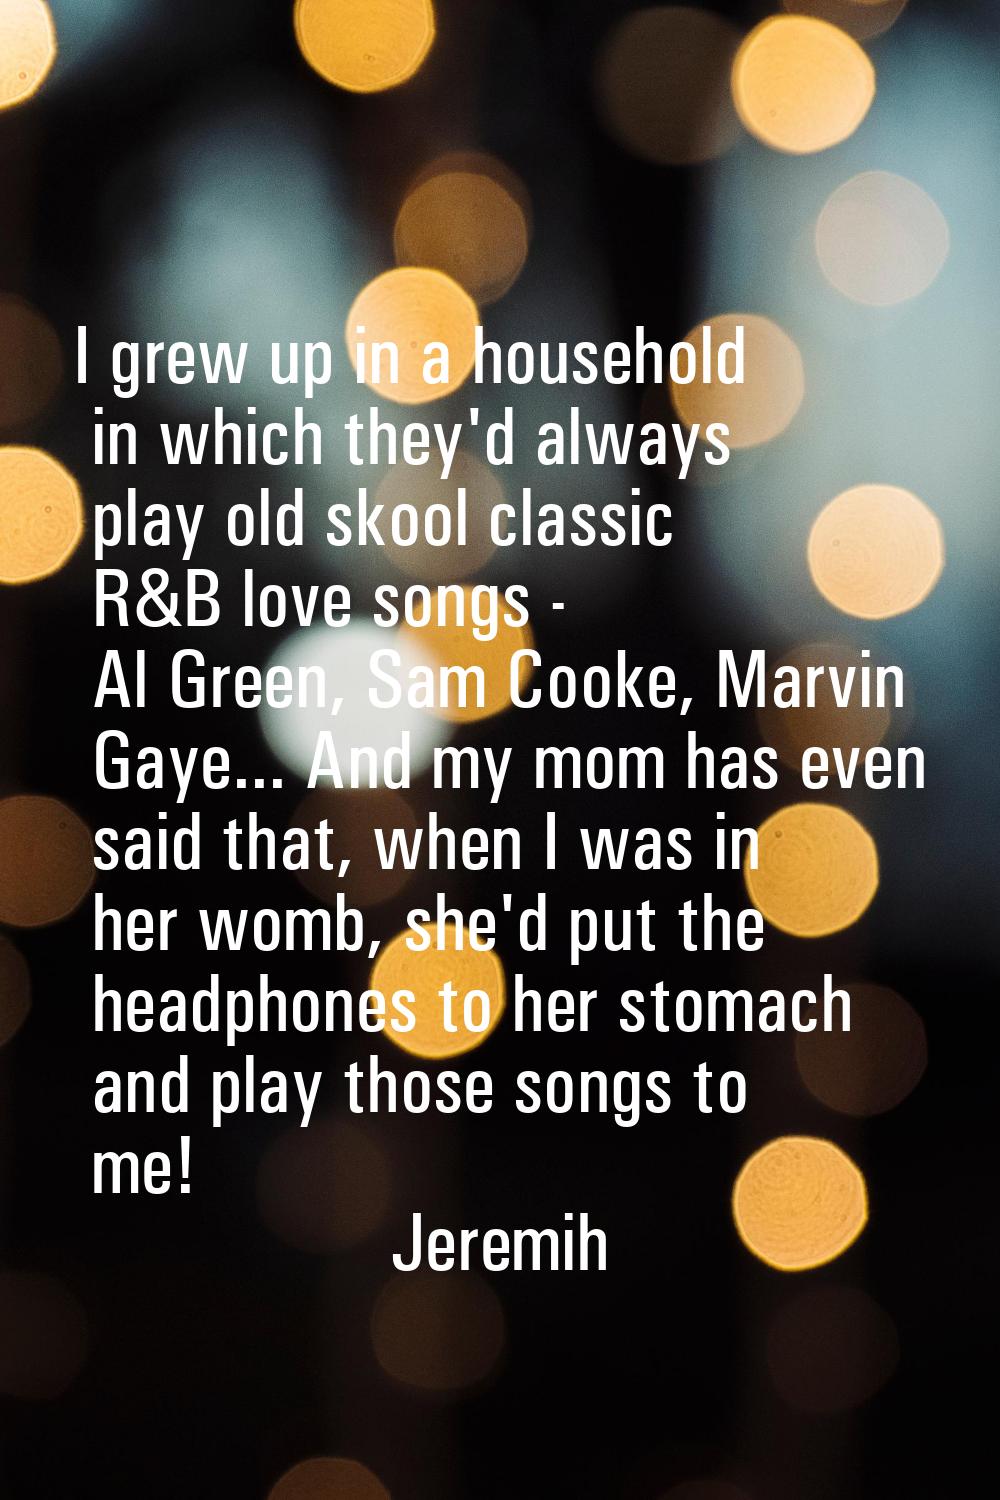 I grew up in a household in which they'd always play old skool classic R&B love songs - Al Green, S